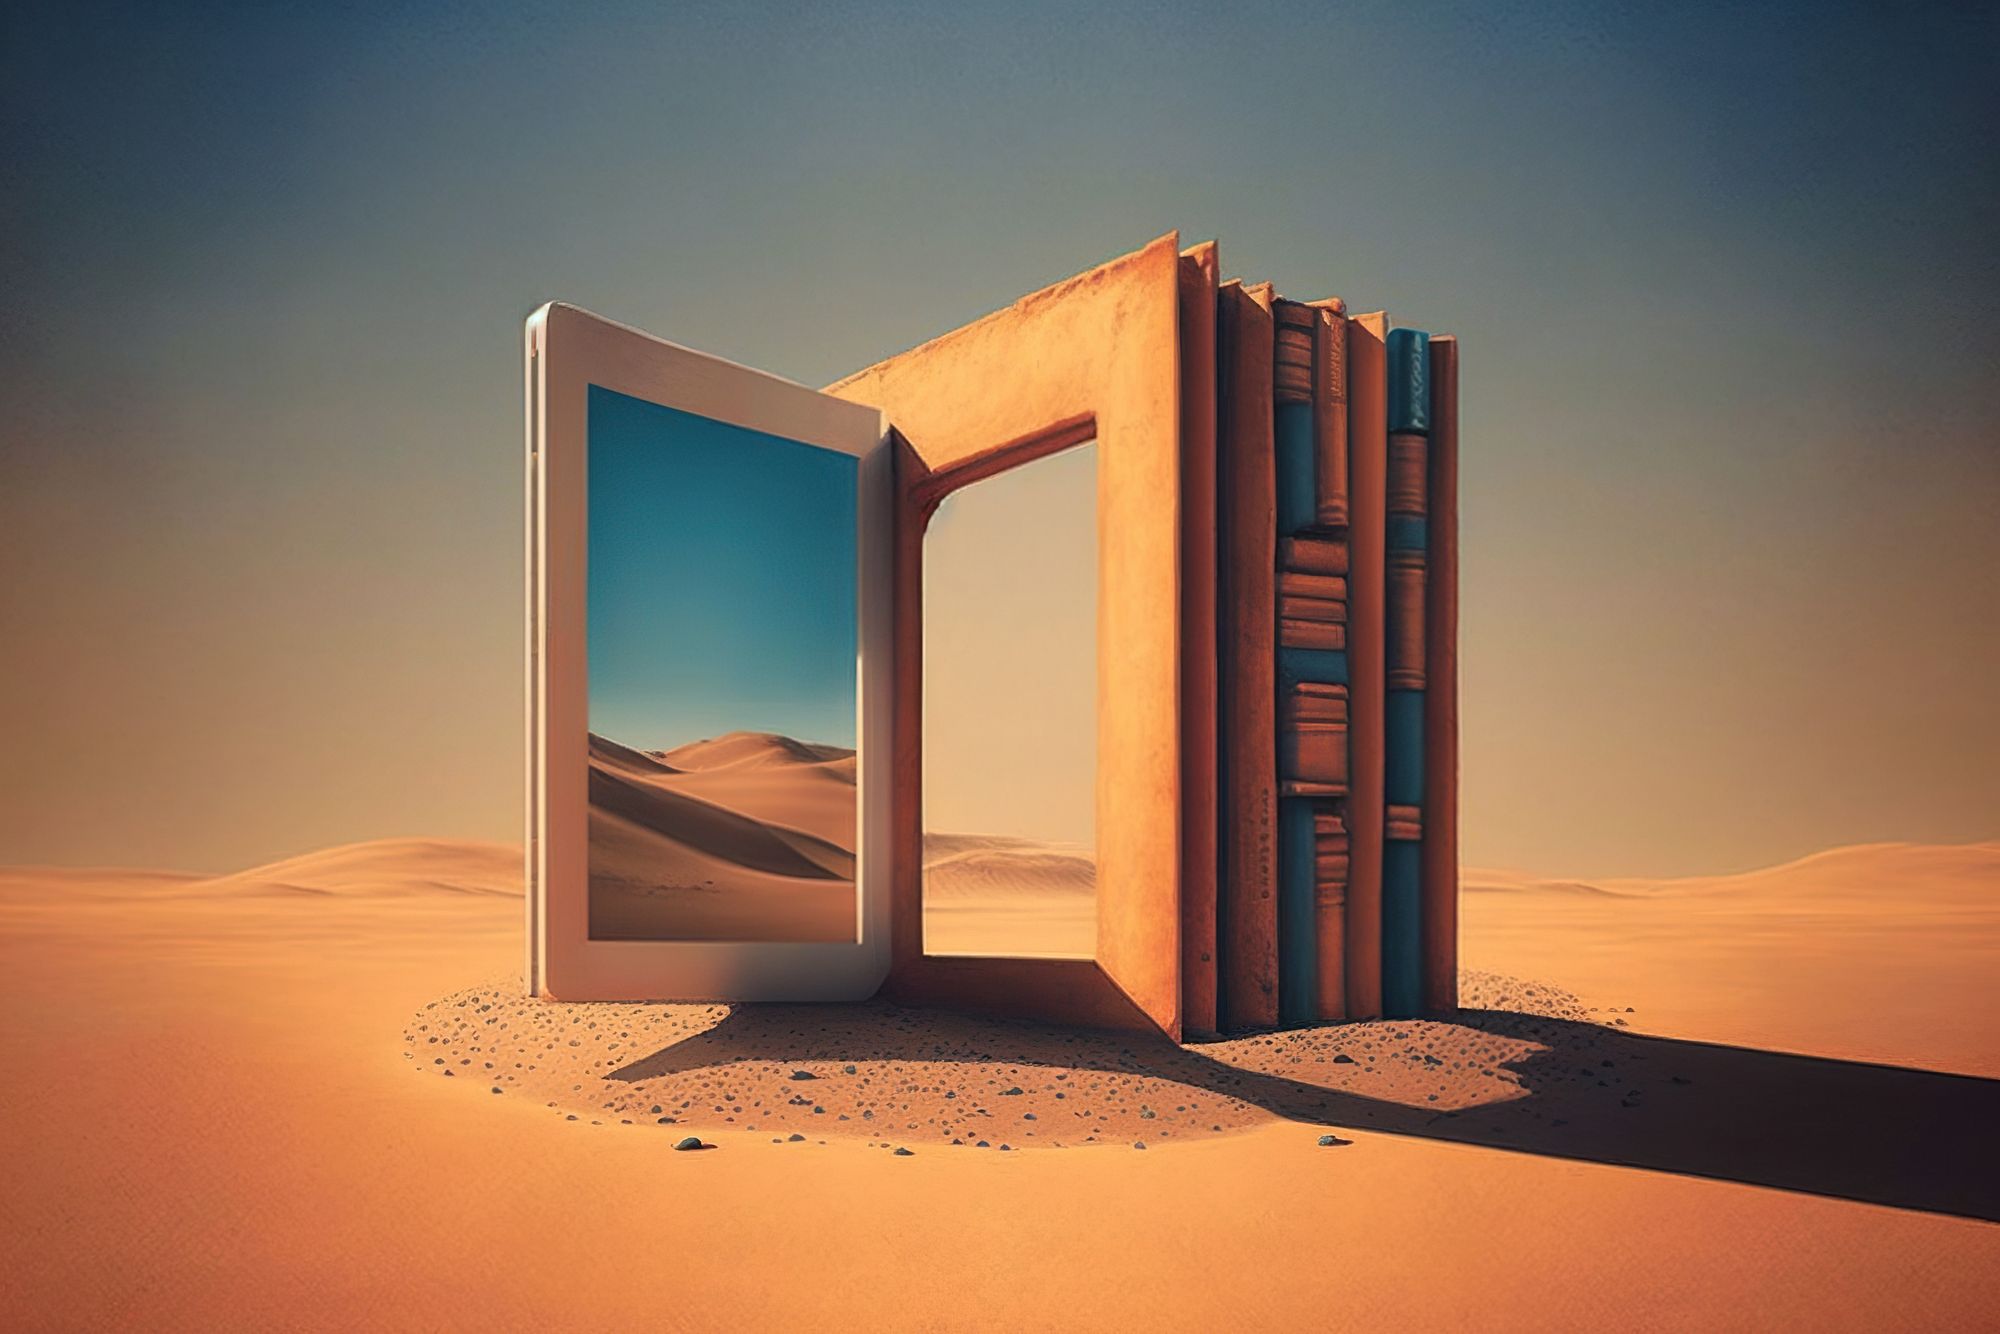 Concept depicting limited access to technology and information. Archway made of books and a tablet in the desert. 